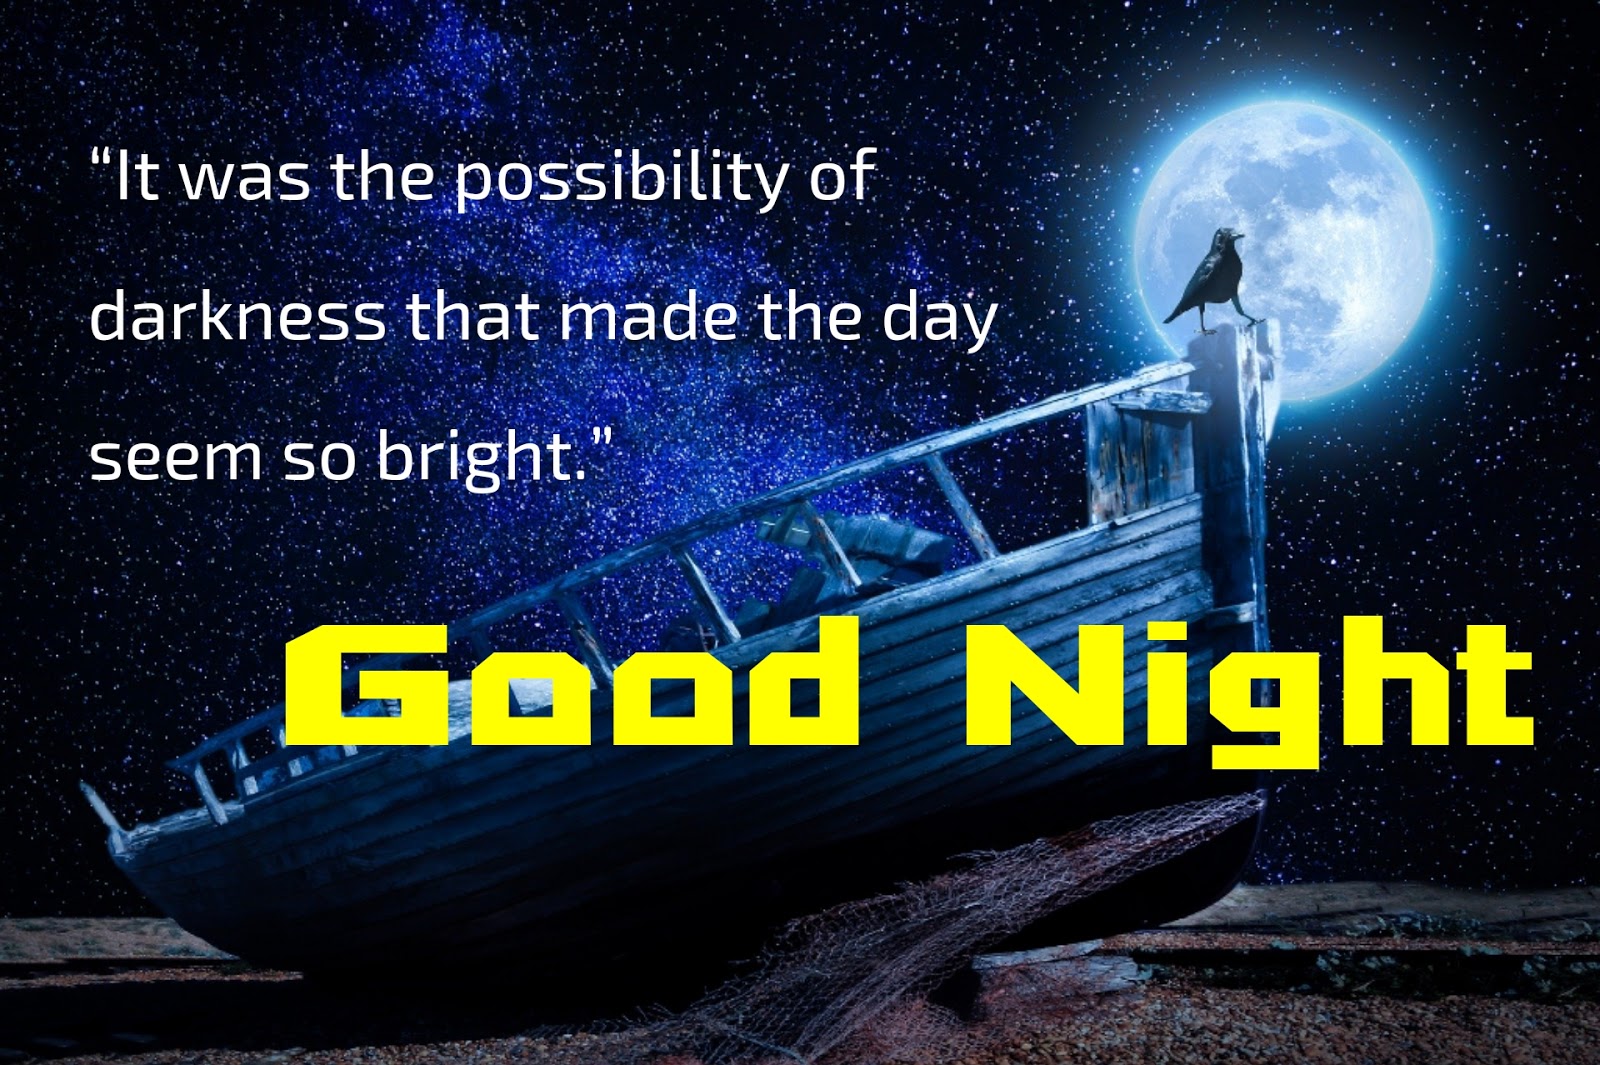 Good night quotes in English with images